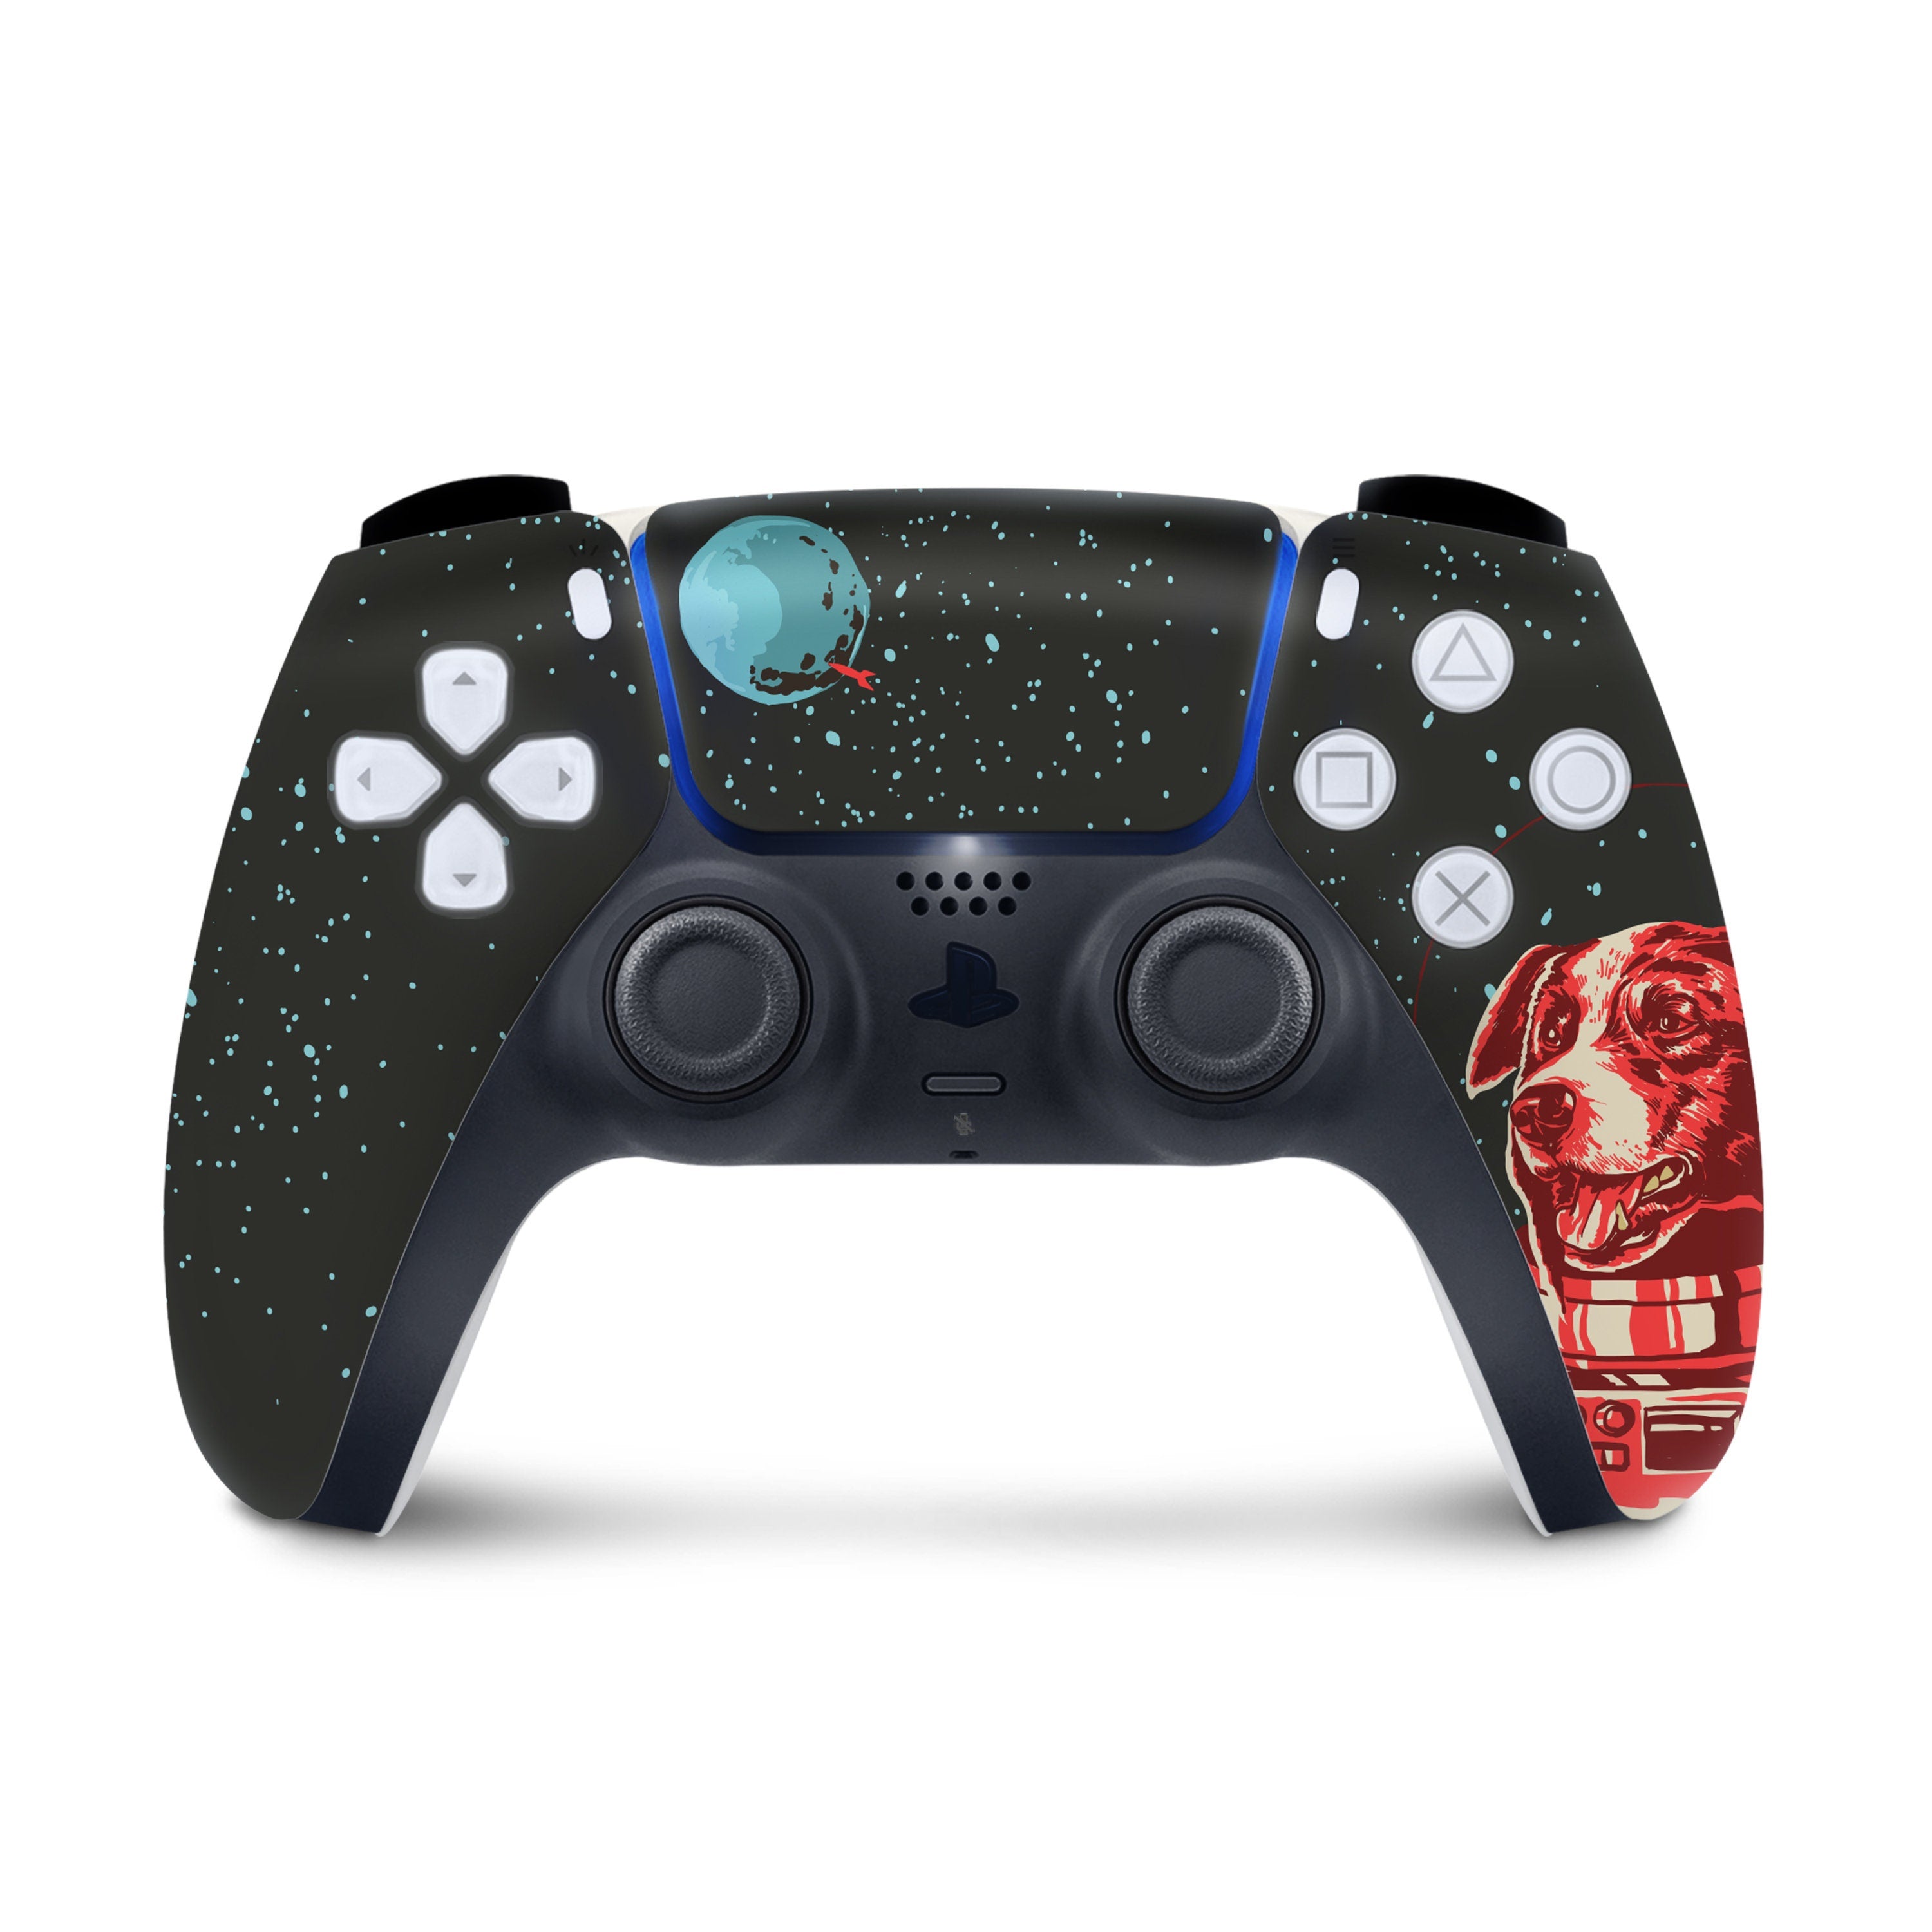 Space dog Ps5 skin, Playstation 5 controller skin, Vinyl 3m stickers Full wrap cover